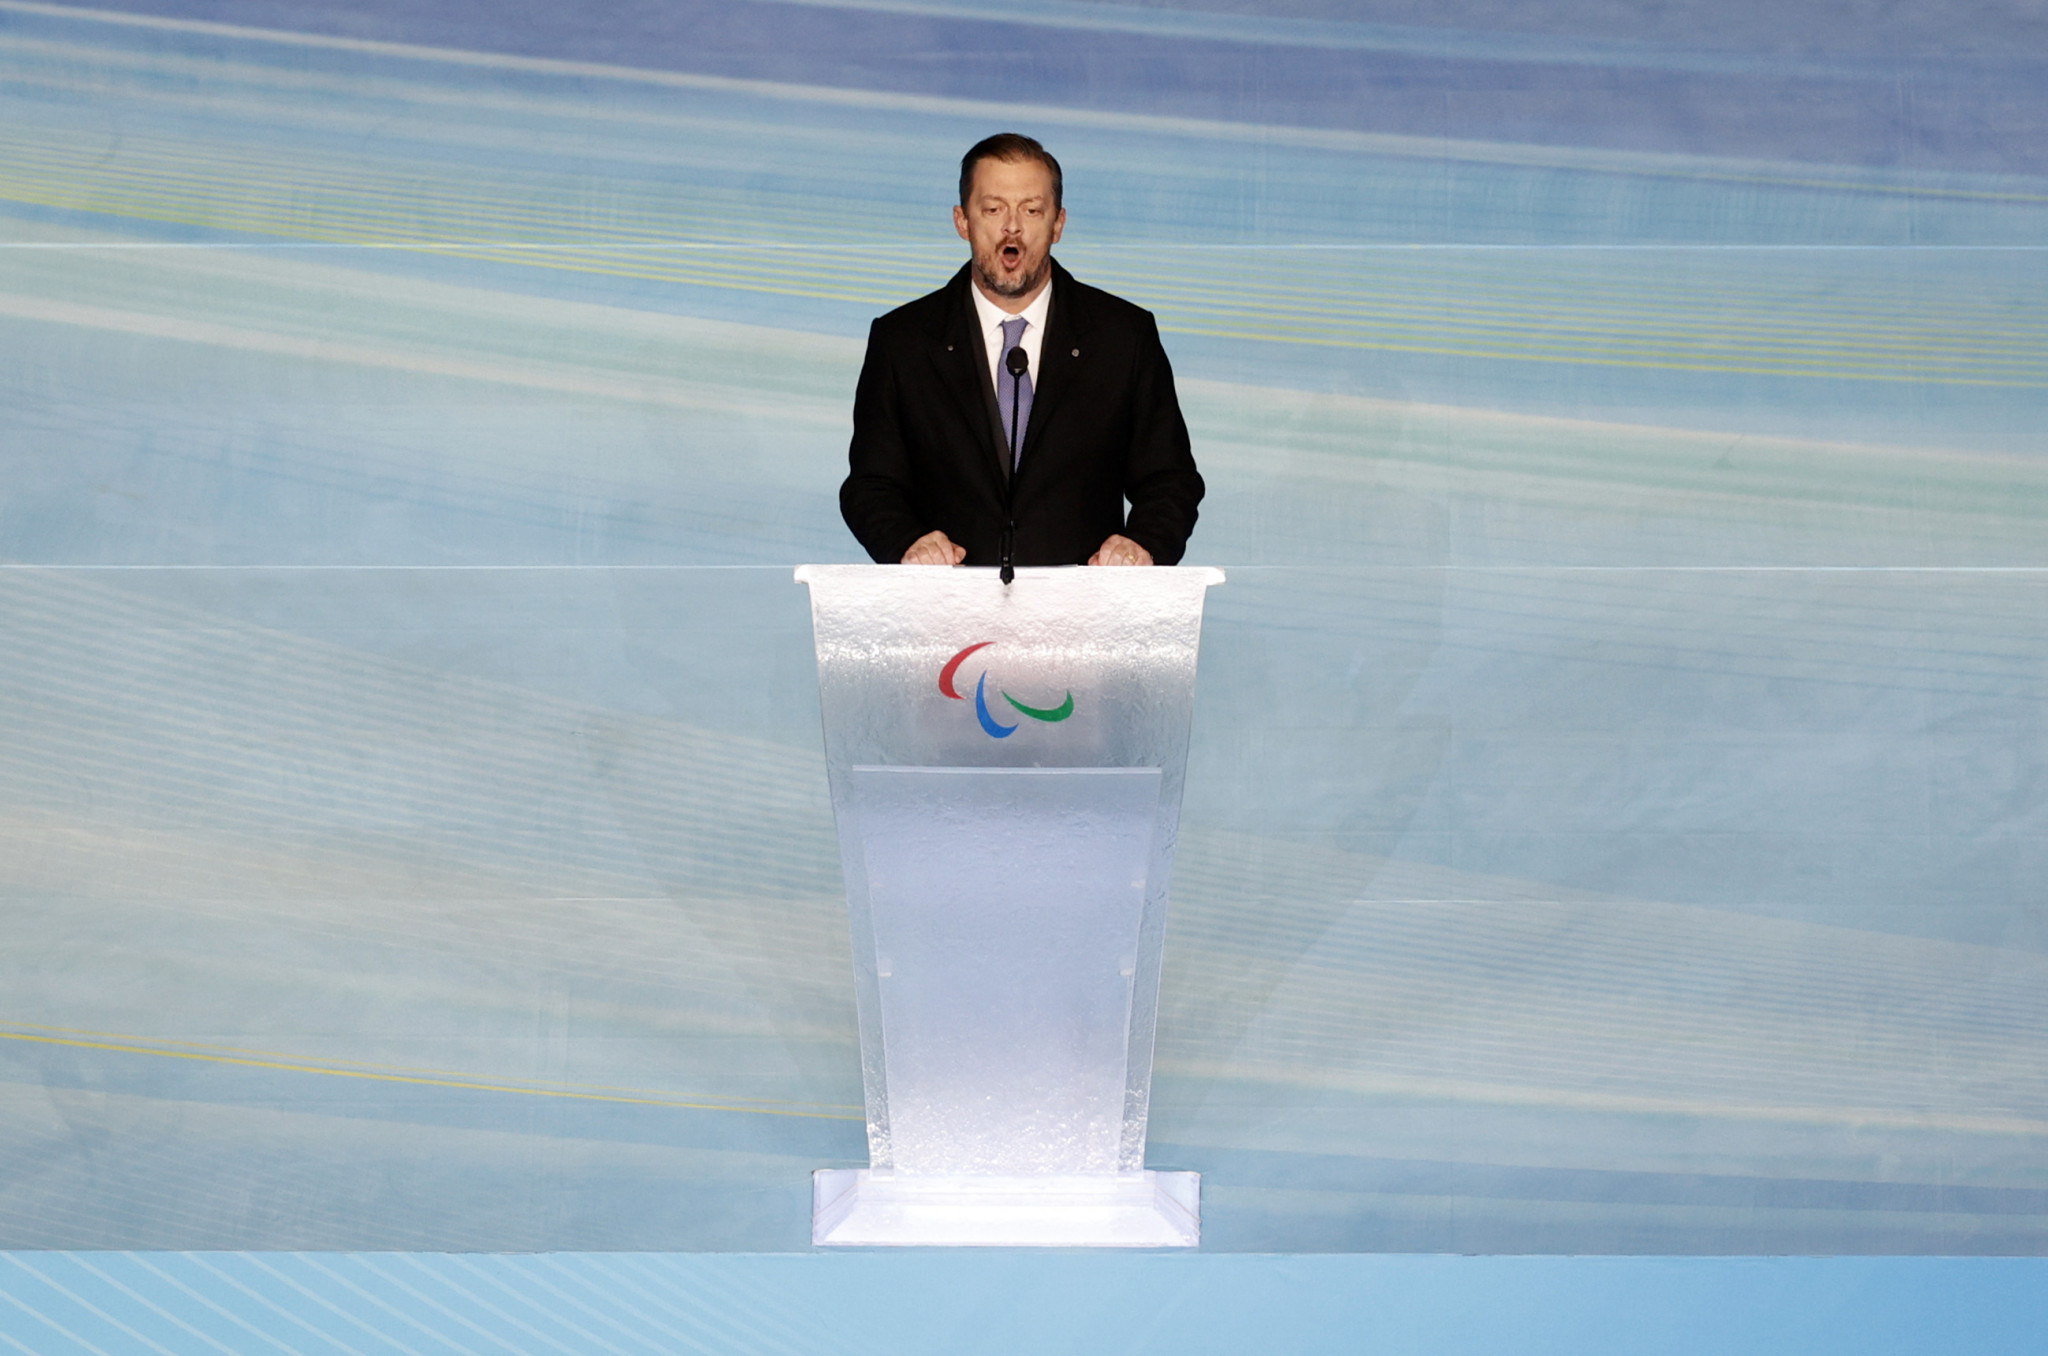 Parsons hails Beijing 2022 Paralympics as sending "powerful message of inclusion"